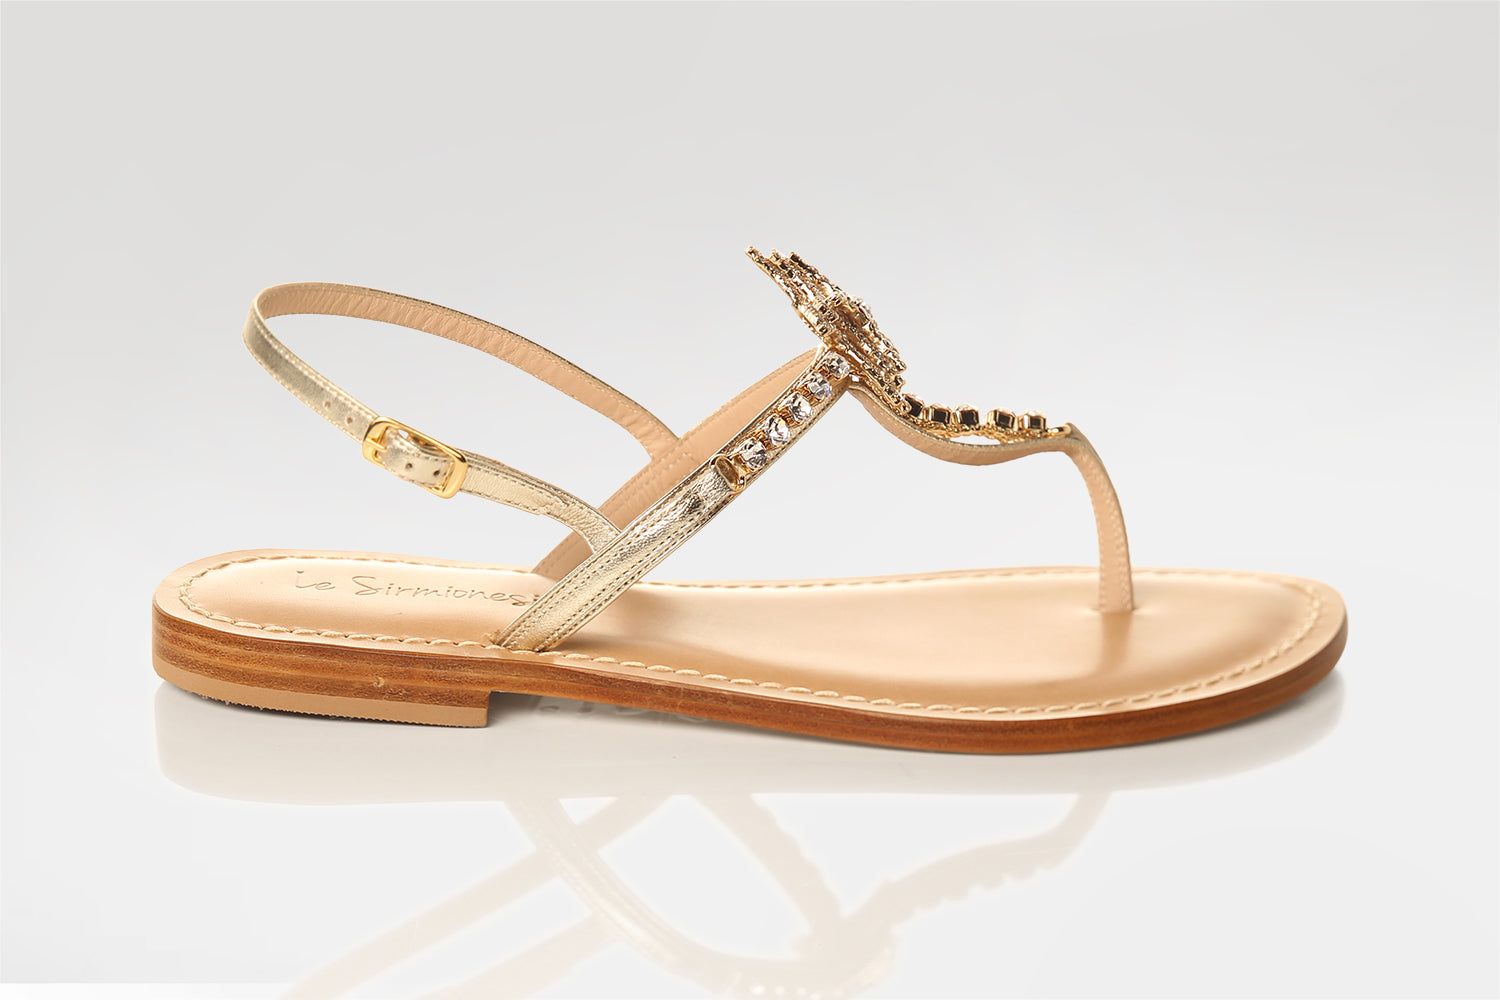 Gold Chain Toe Post sandals | Cheap Pretty Sandals For The Summer